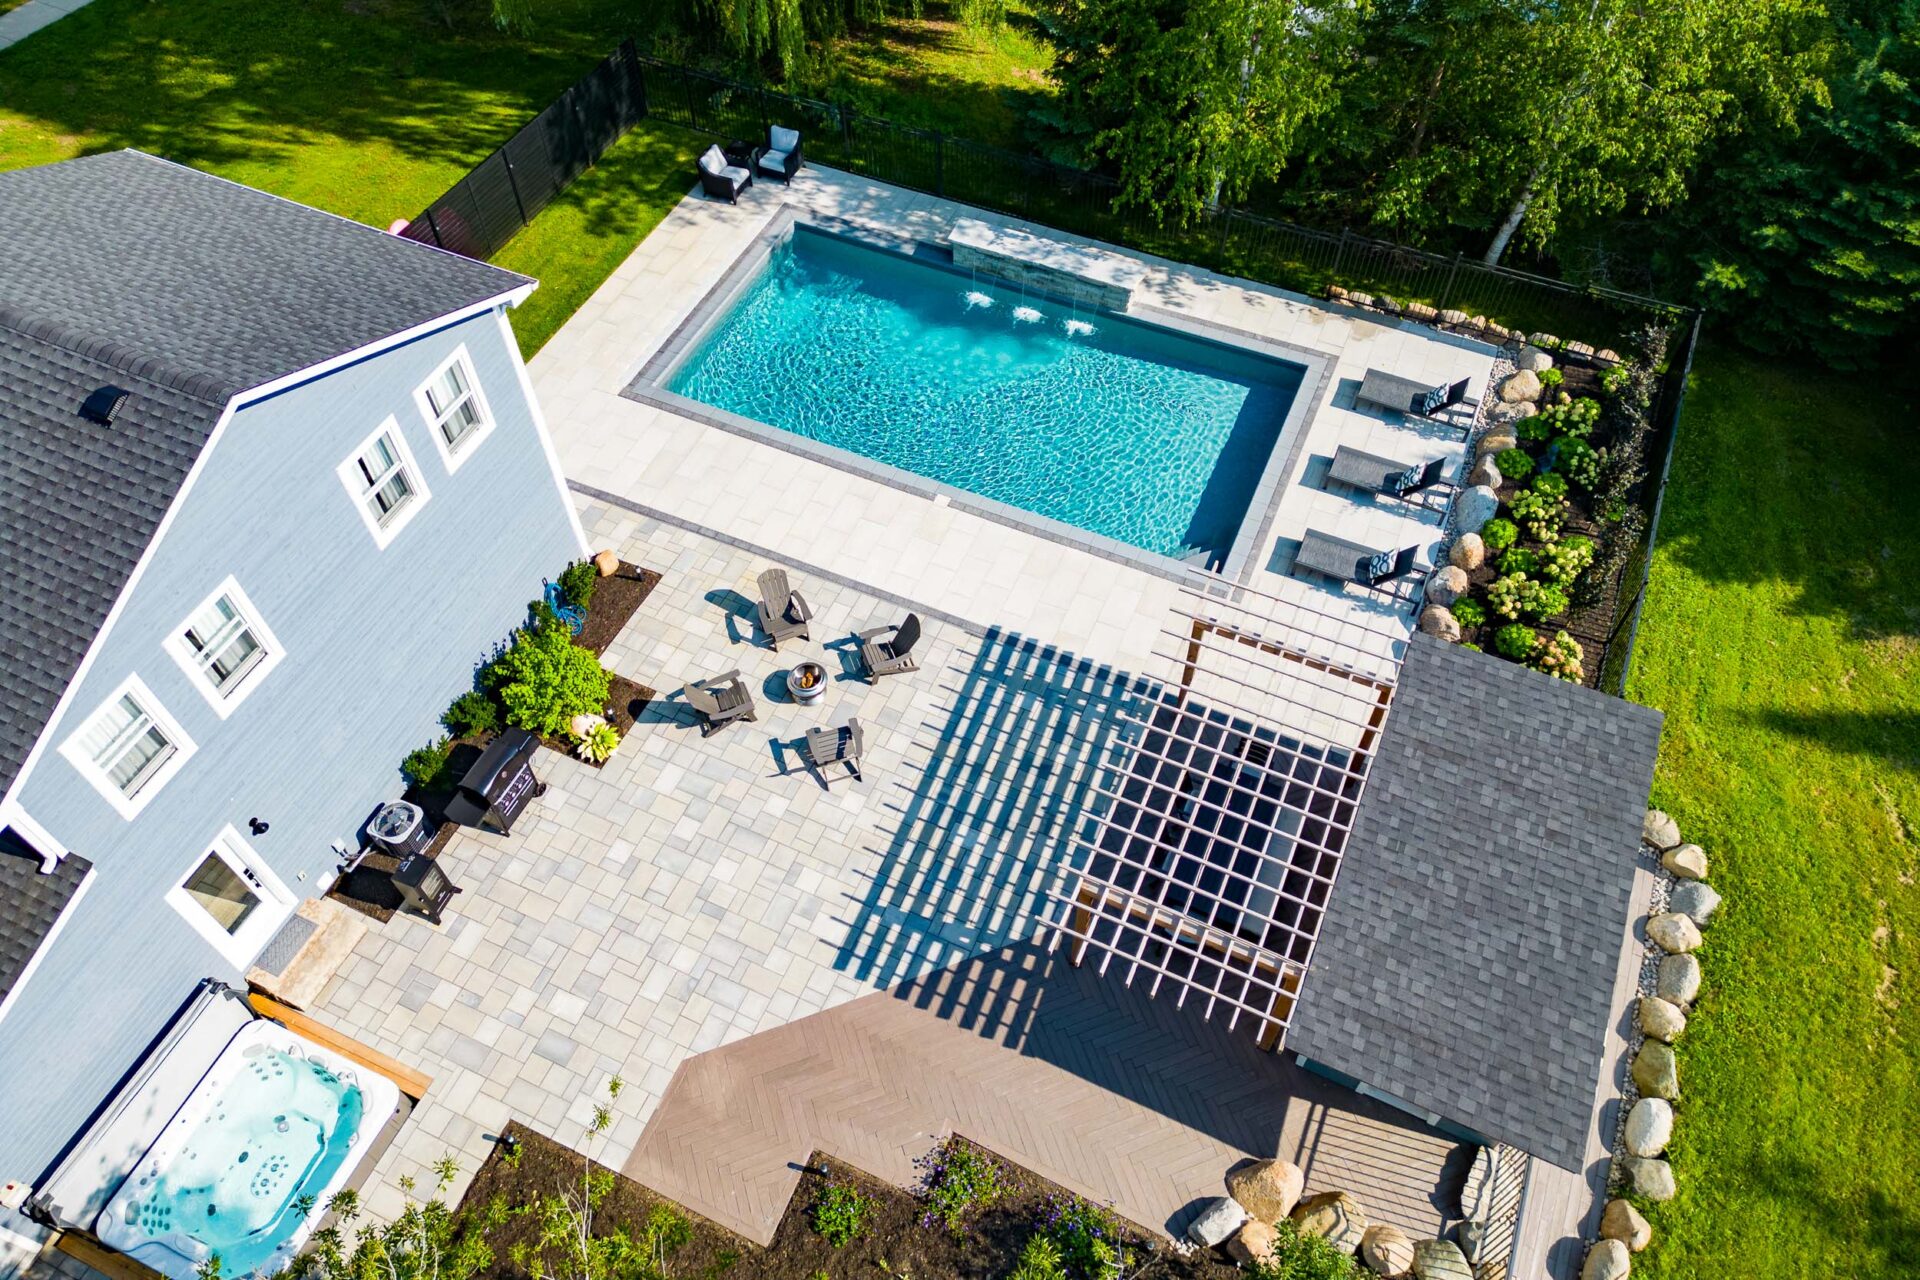 Aerial view of a residential backyard with a swimming pool, hot tub, patio, outdoor furniture, pergola, and well-manicured lawn surrounded by a fence.